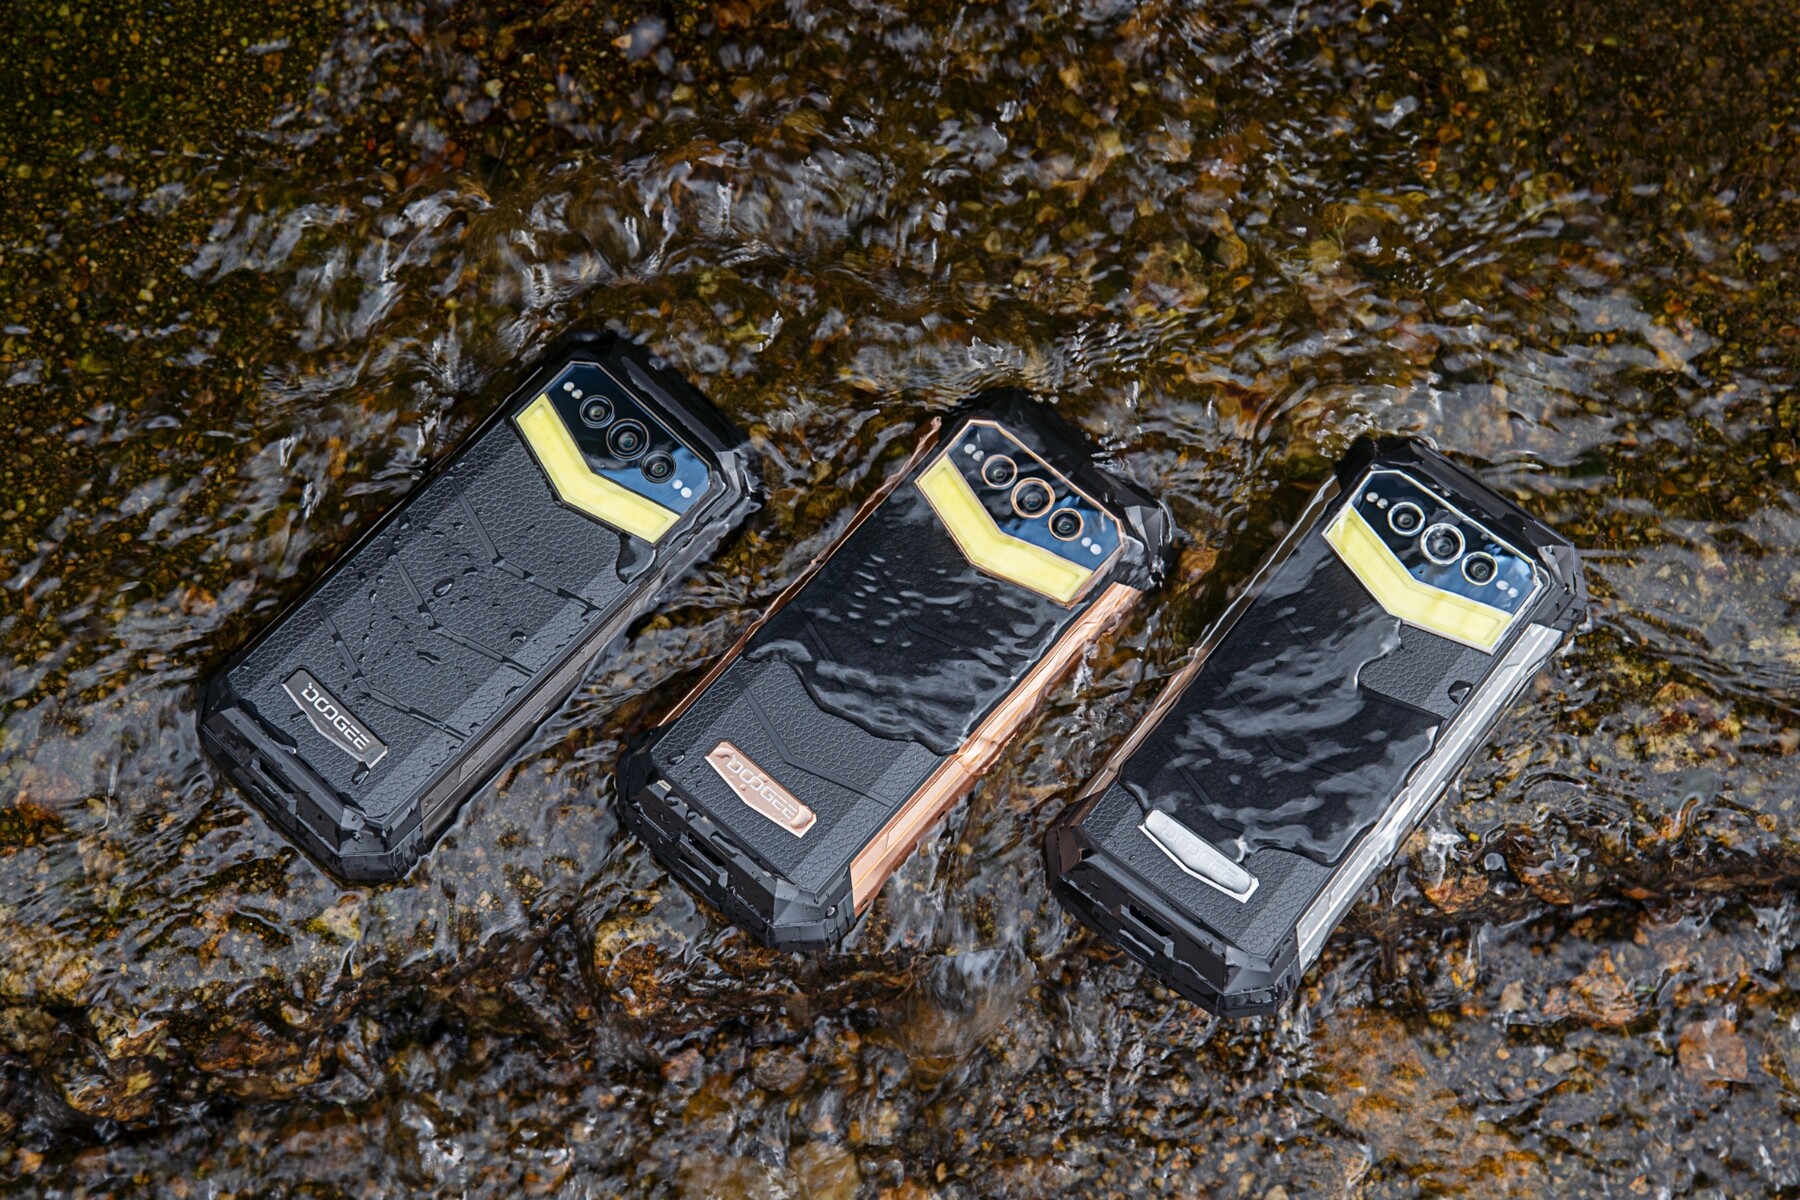 Doogee introduces two new rugged smartphones, namely V20 Pro and S100 Pro -   News